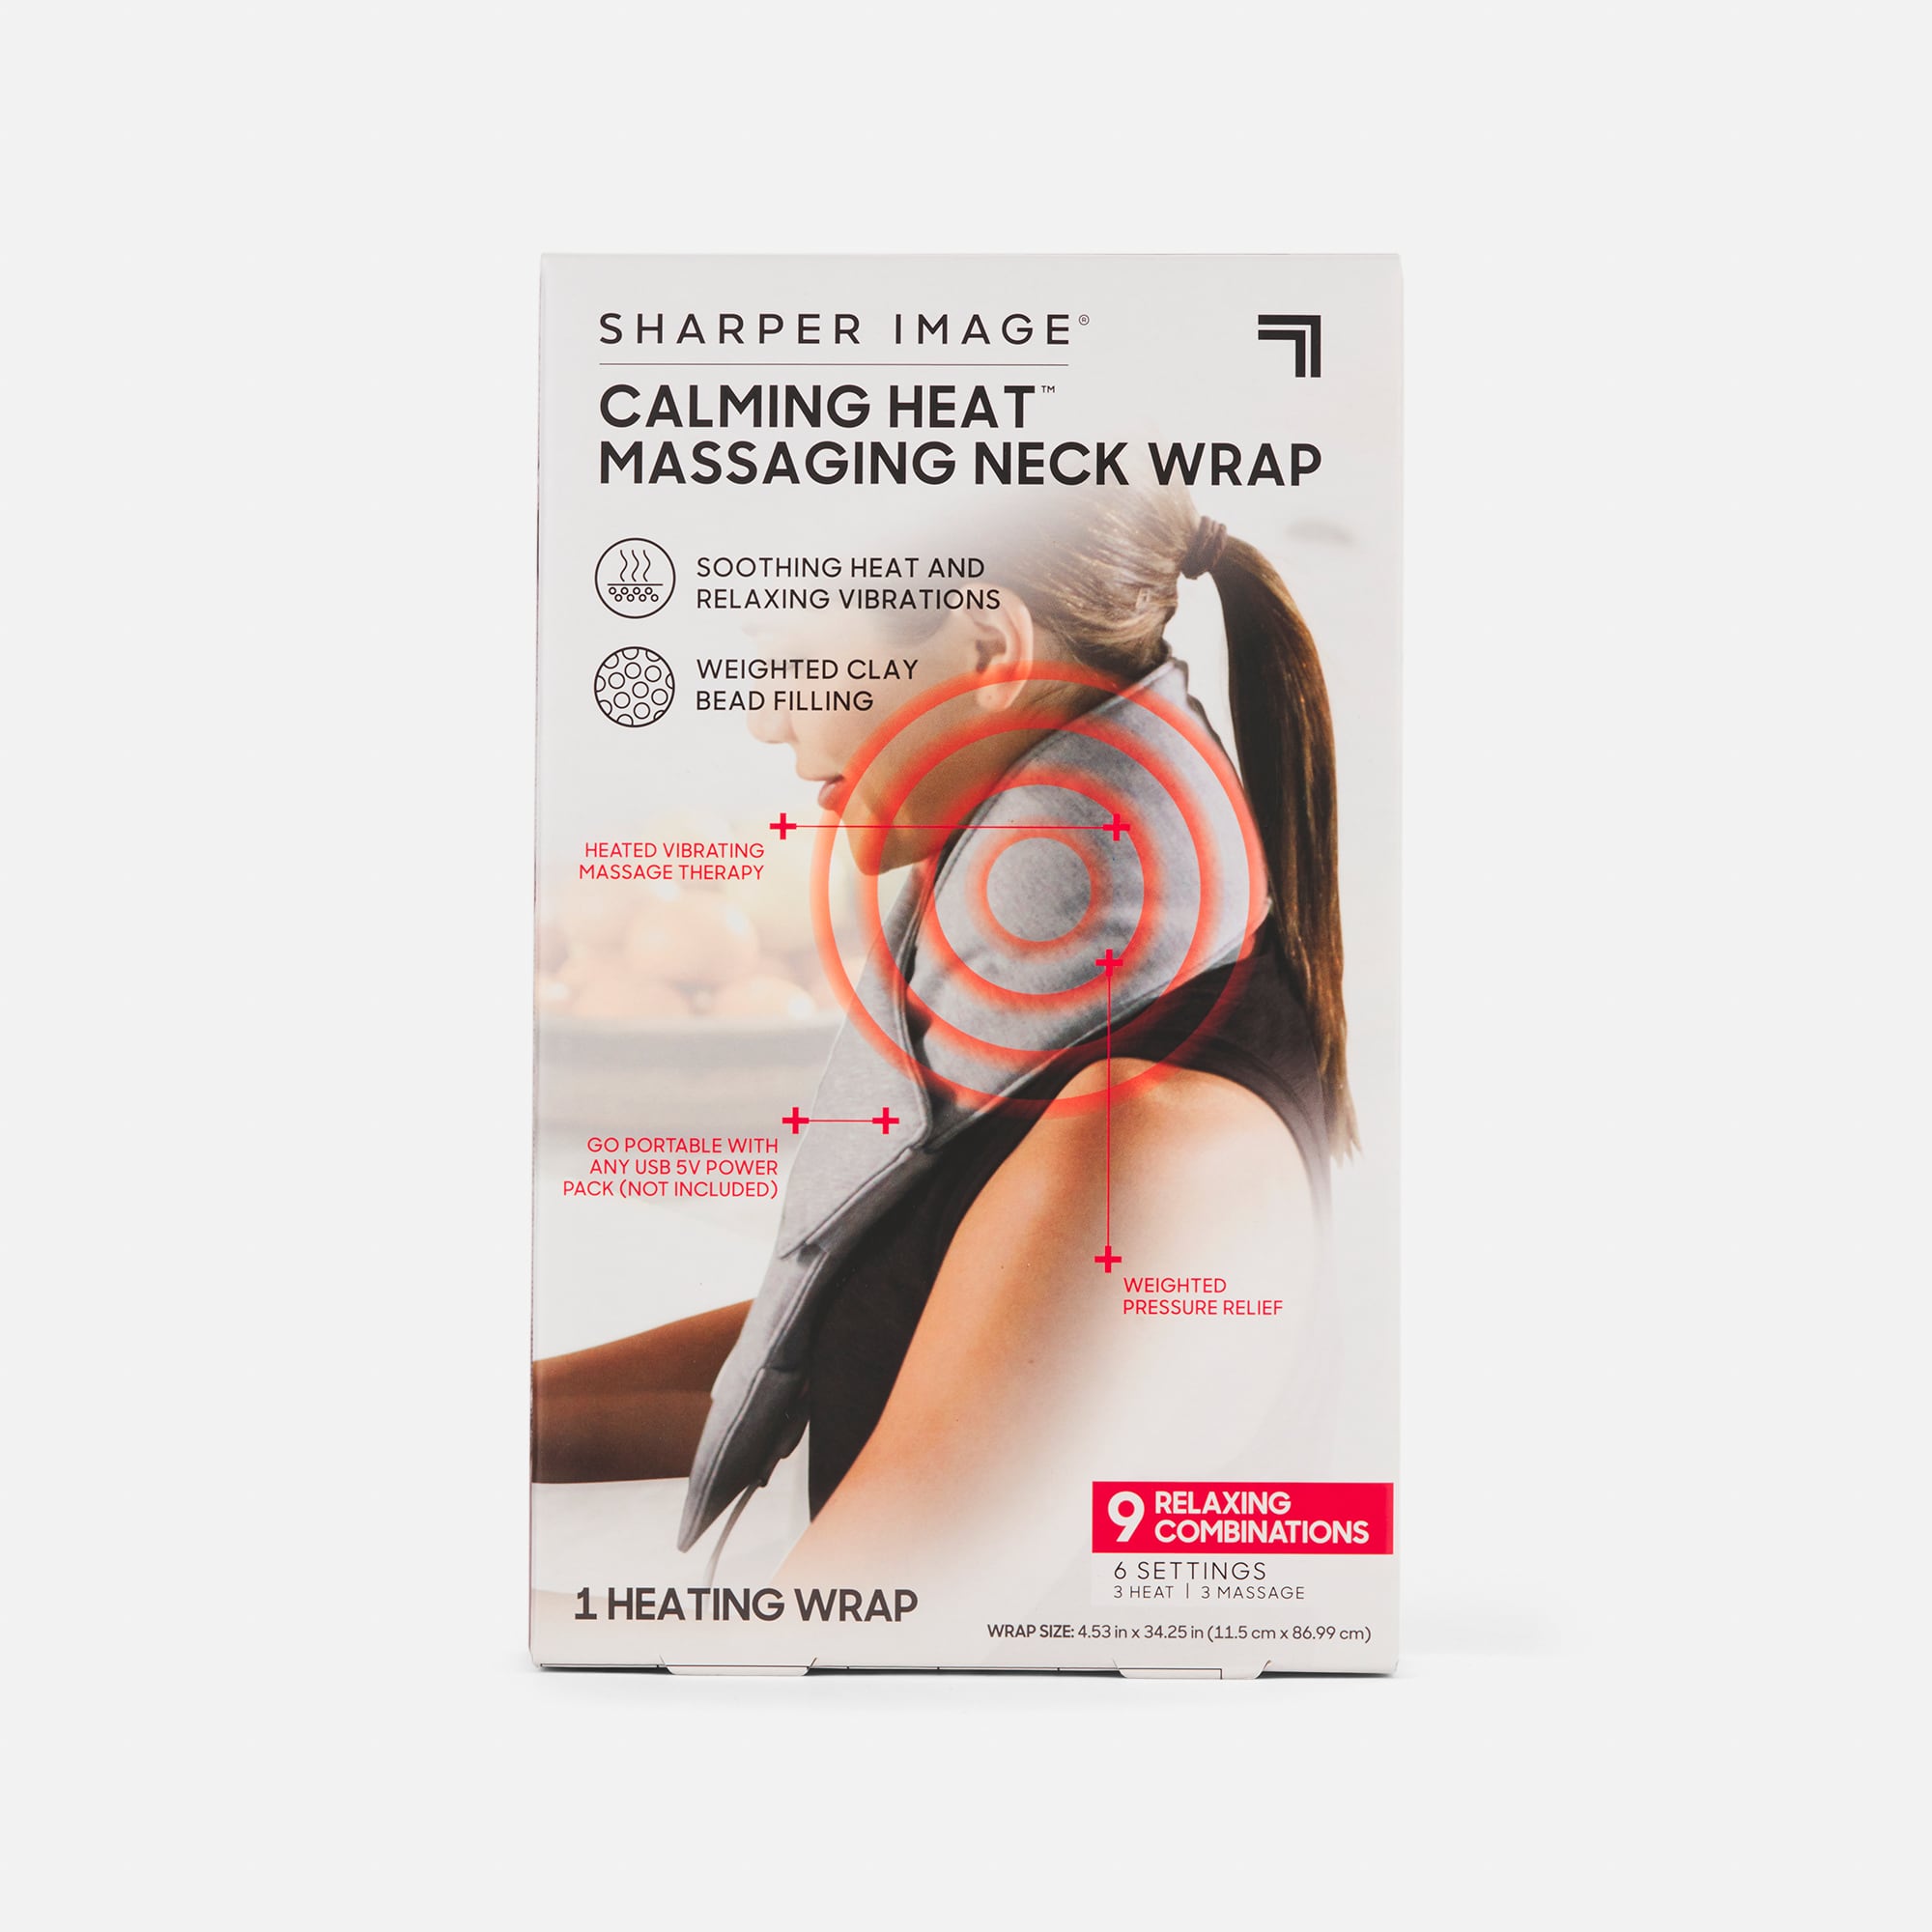 Calming Heat Neck Wrap by Sharper Image Personal Electric Neck